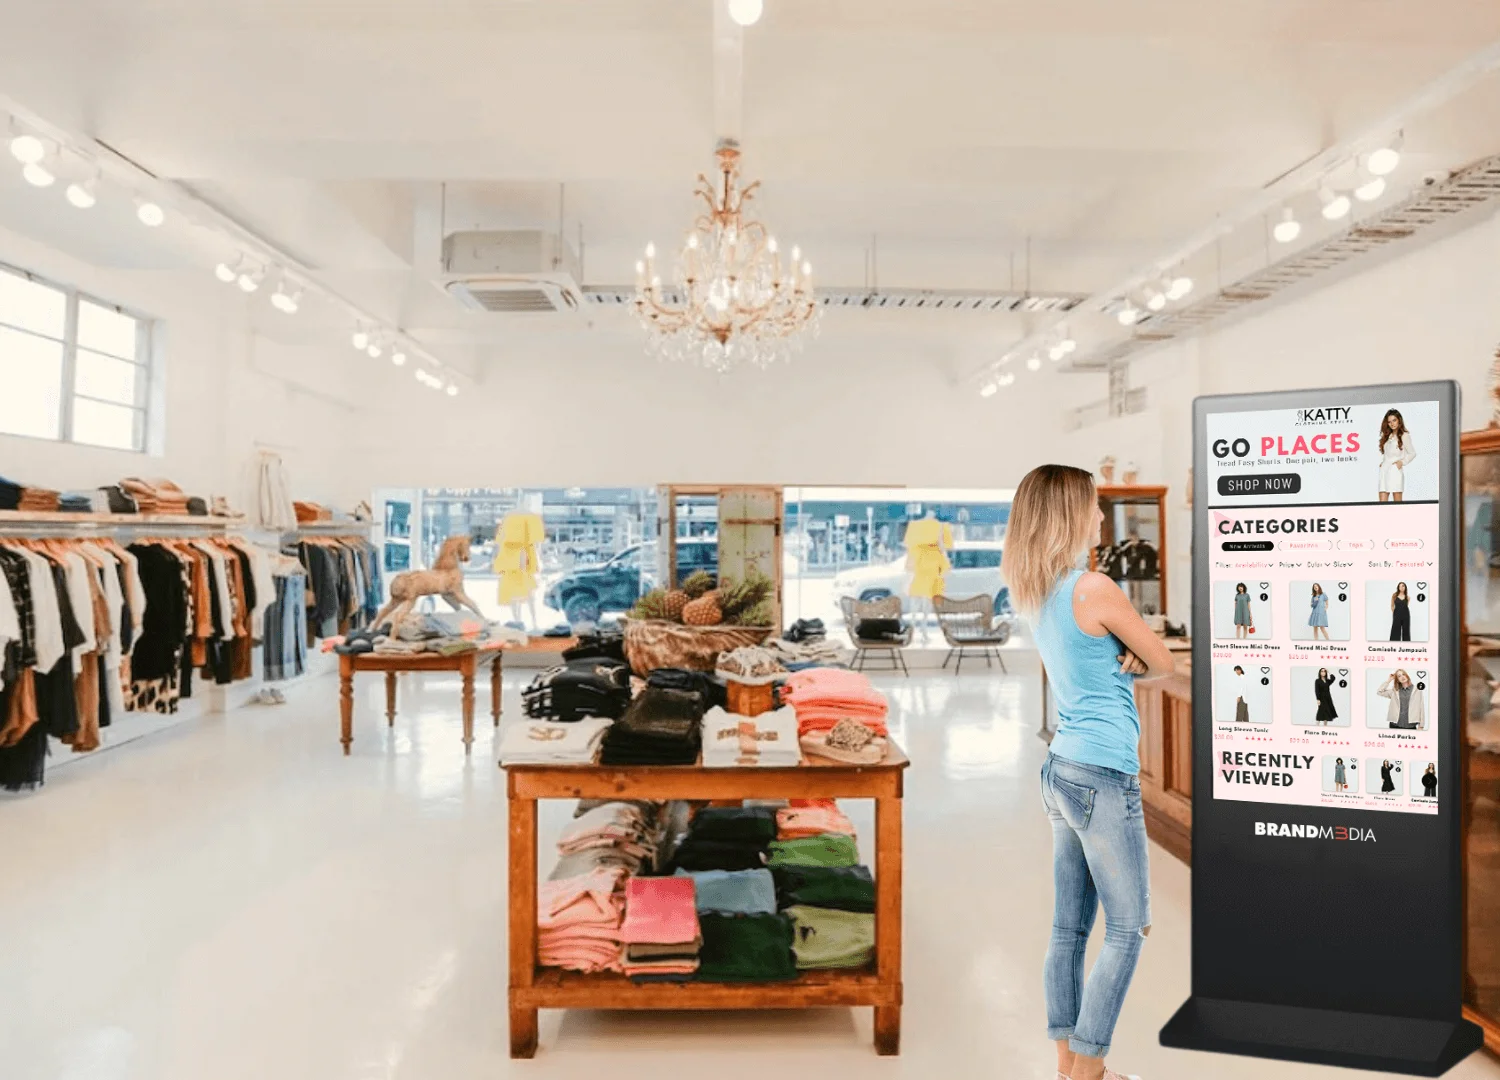 Innovative kiosk driving engagement with attractive franchise offerings